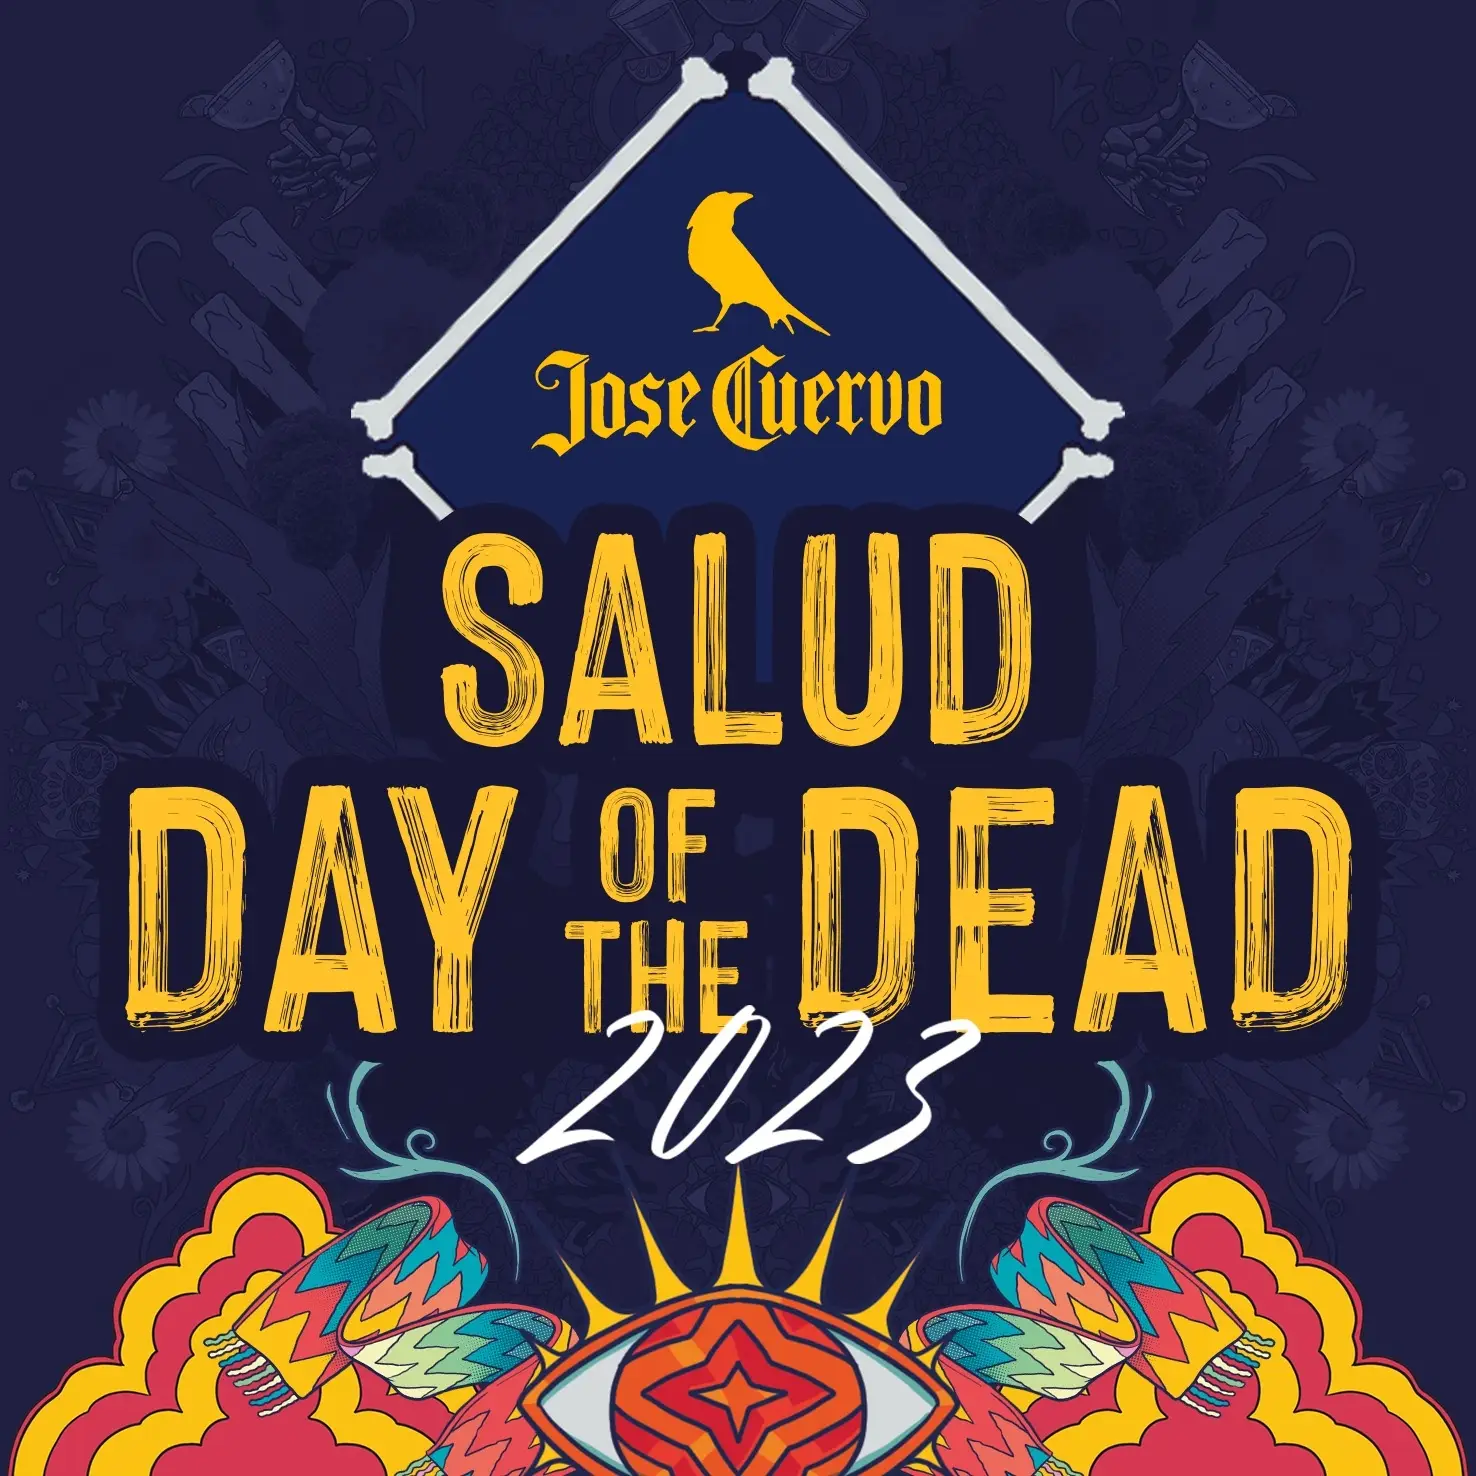 Jose Cuervo – Day of the Dead